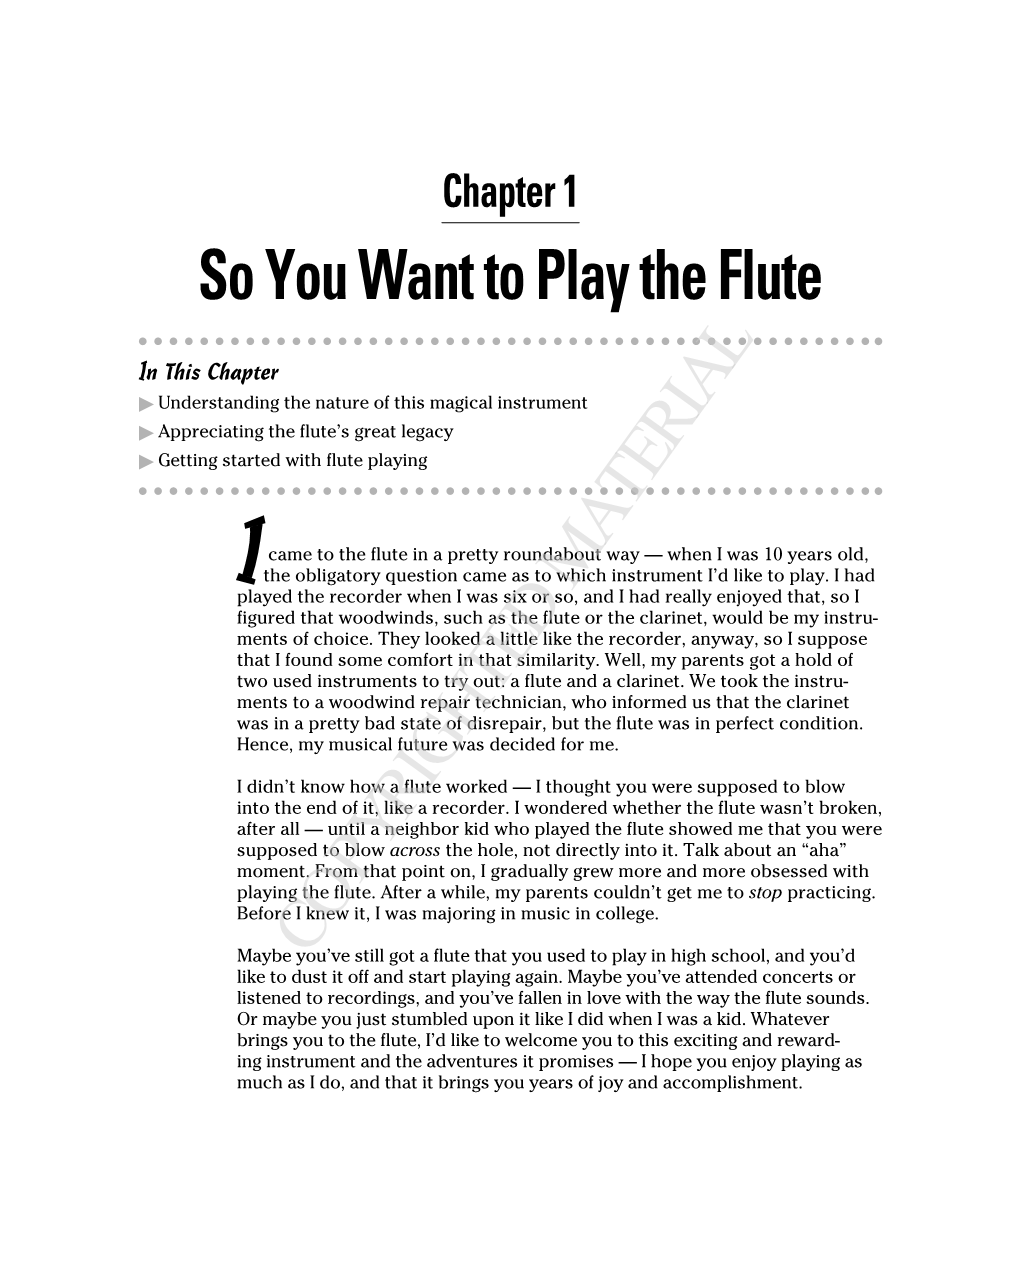 So You Want to Play the Flute